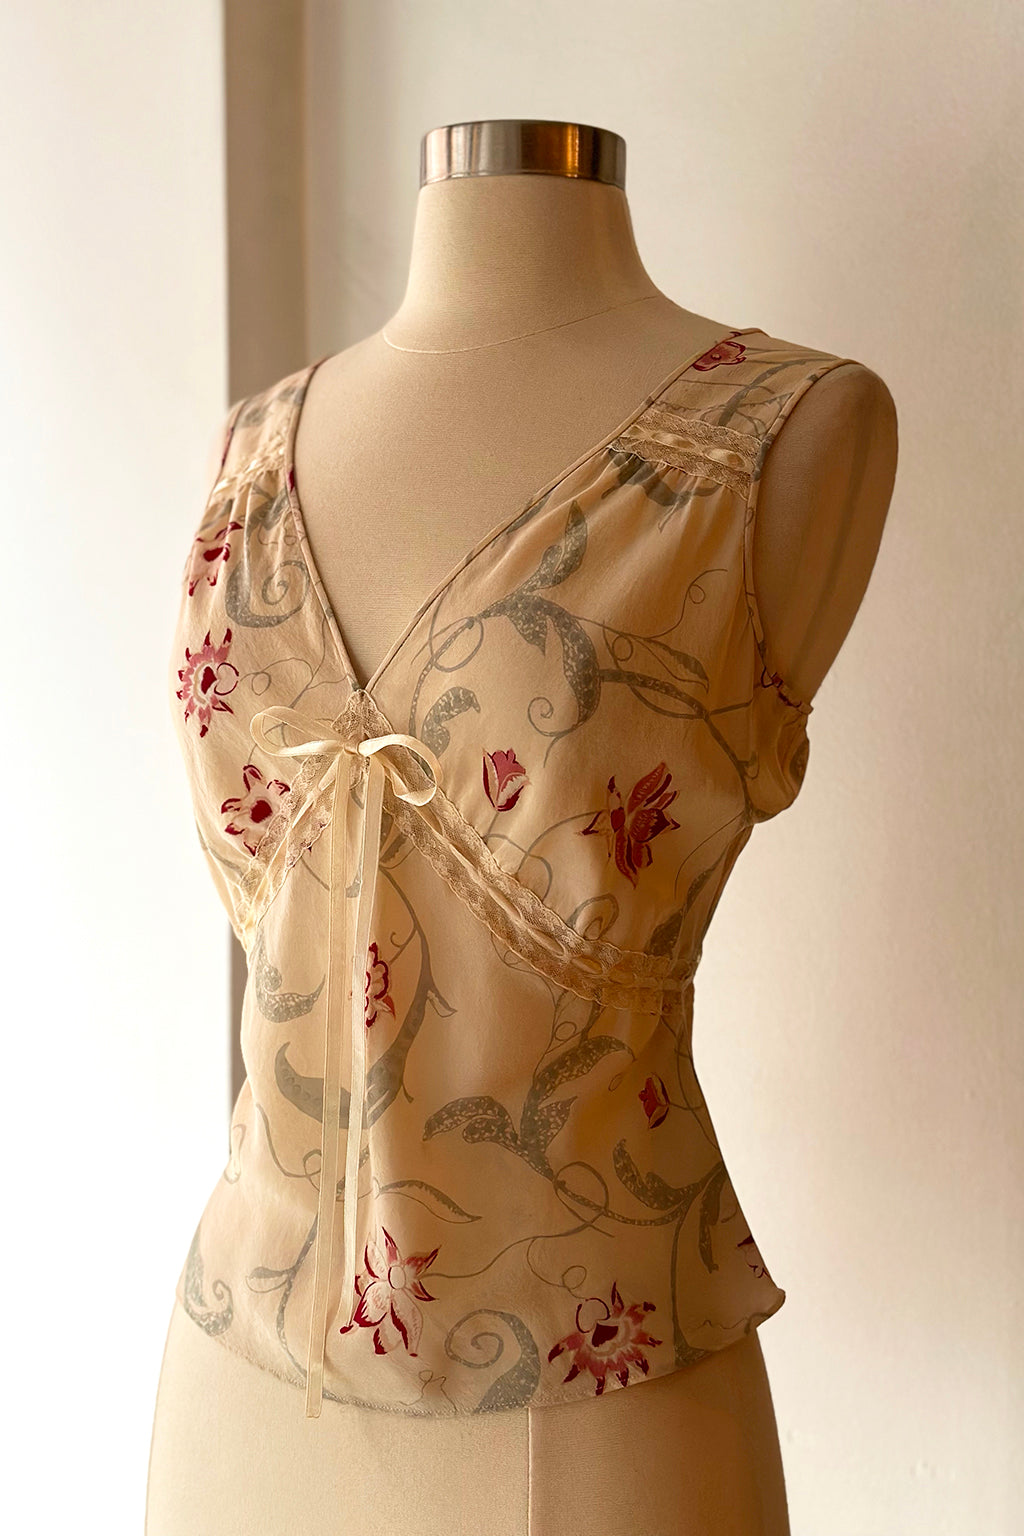 Vintage 90s Silk Floral Top with Lace & Ribbon